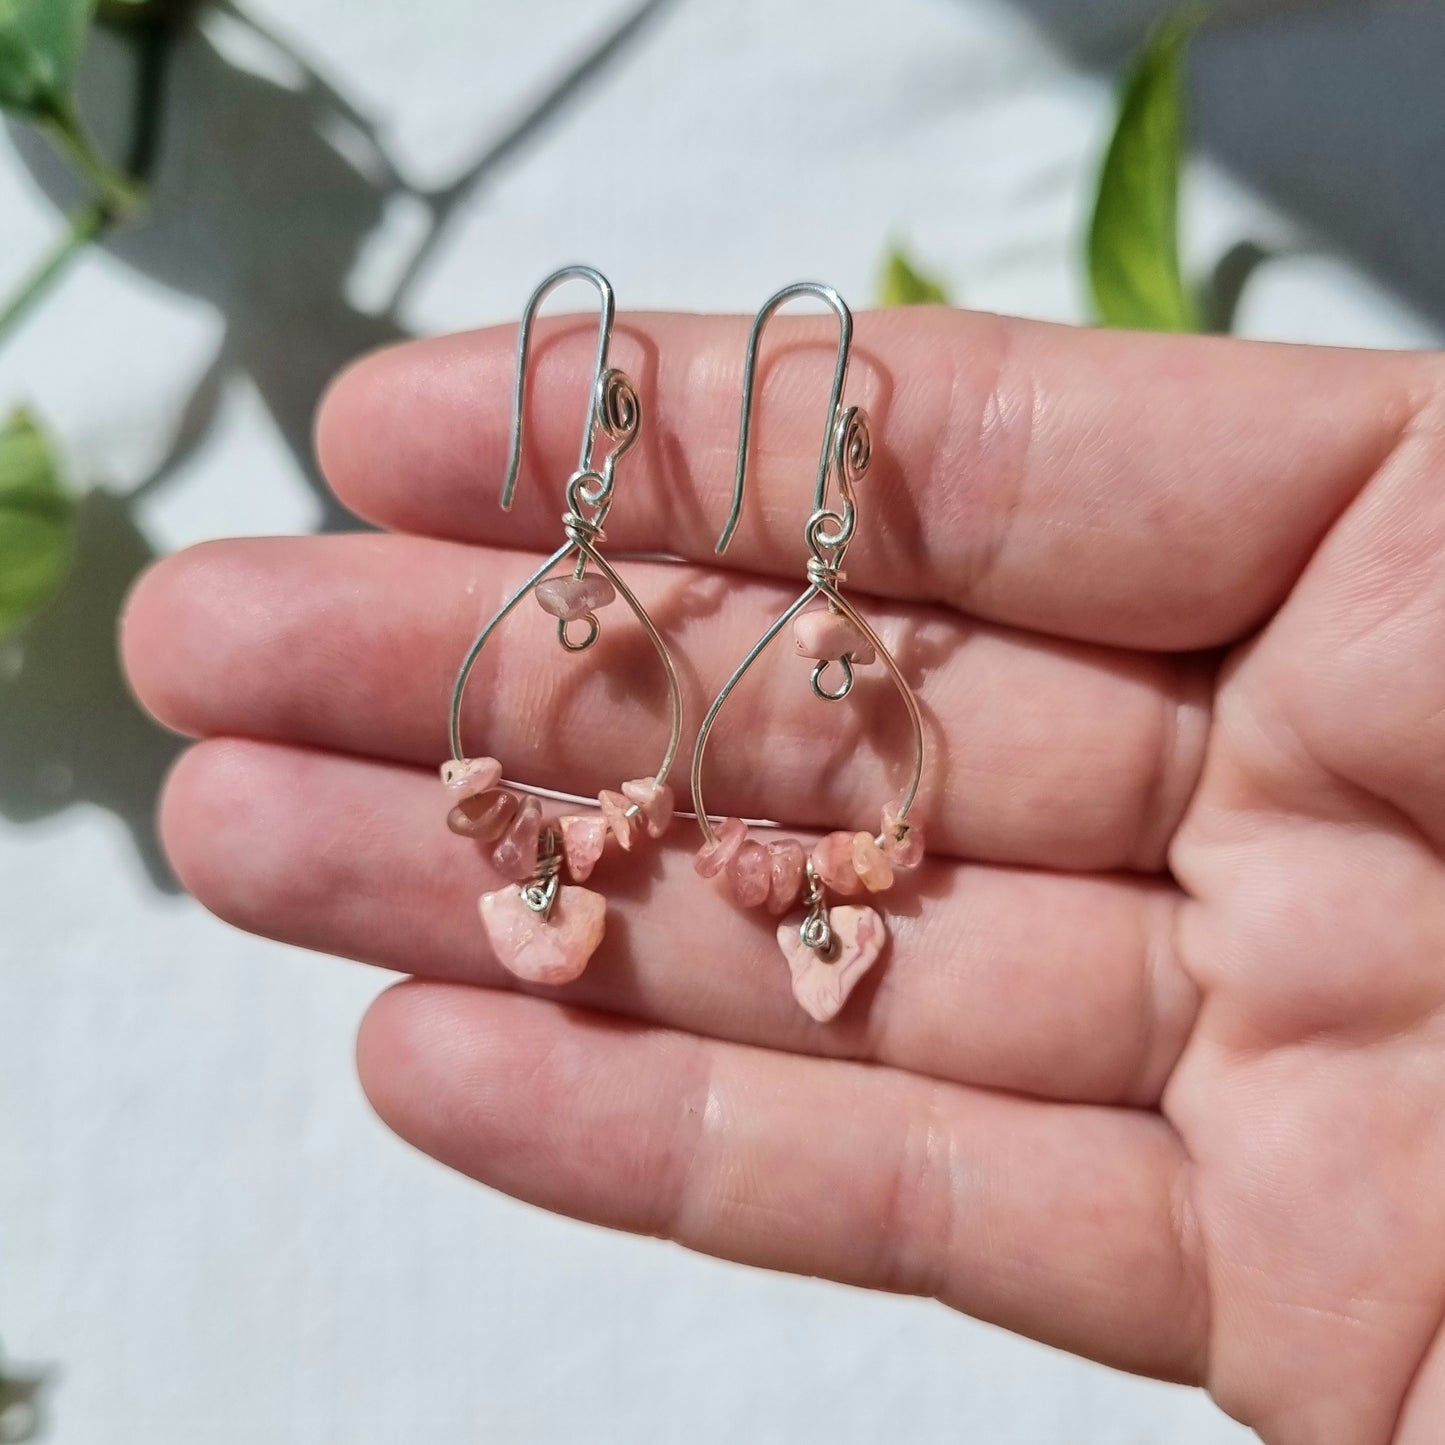 Rhodochrosite Drop and Chip Teardrop Earrings - Ray of Sunshine - Sparrow and Fox